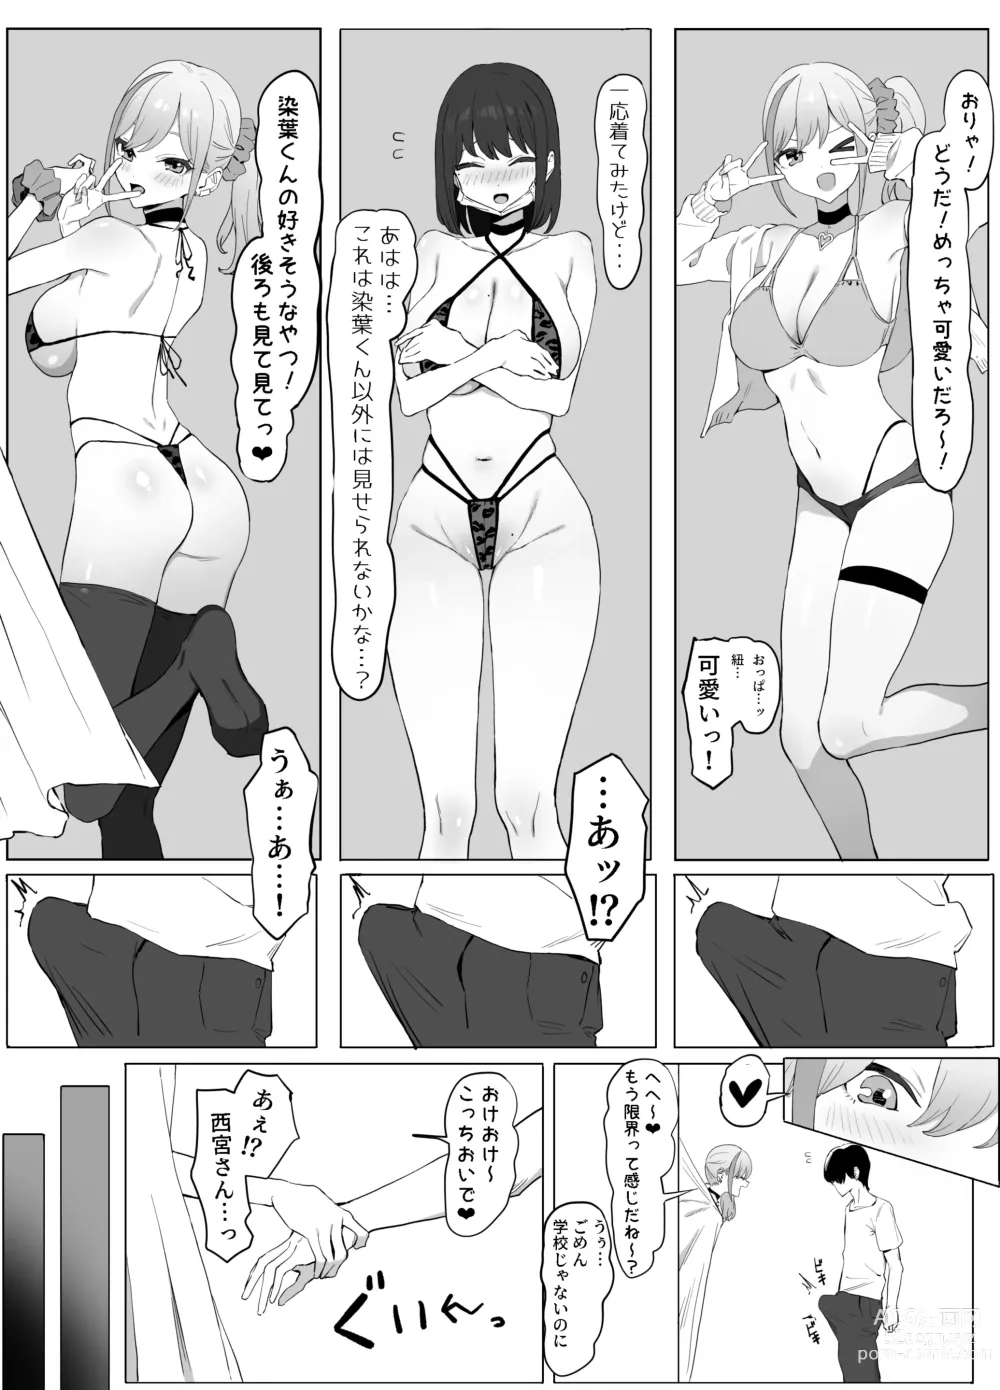 Page 4 of doujinshi Sexual Experimentation Practice! 2